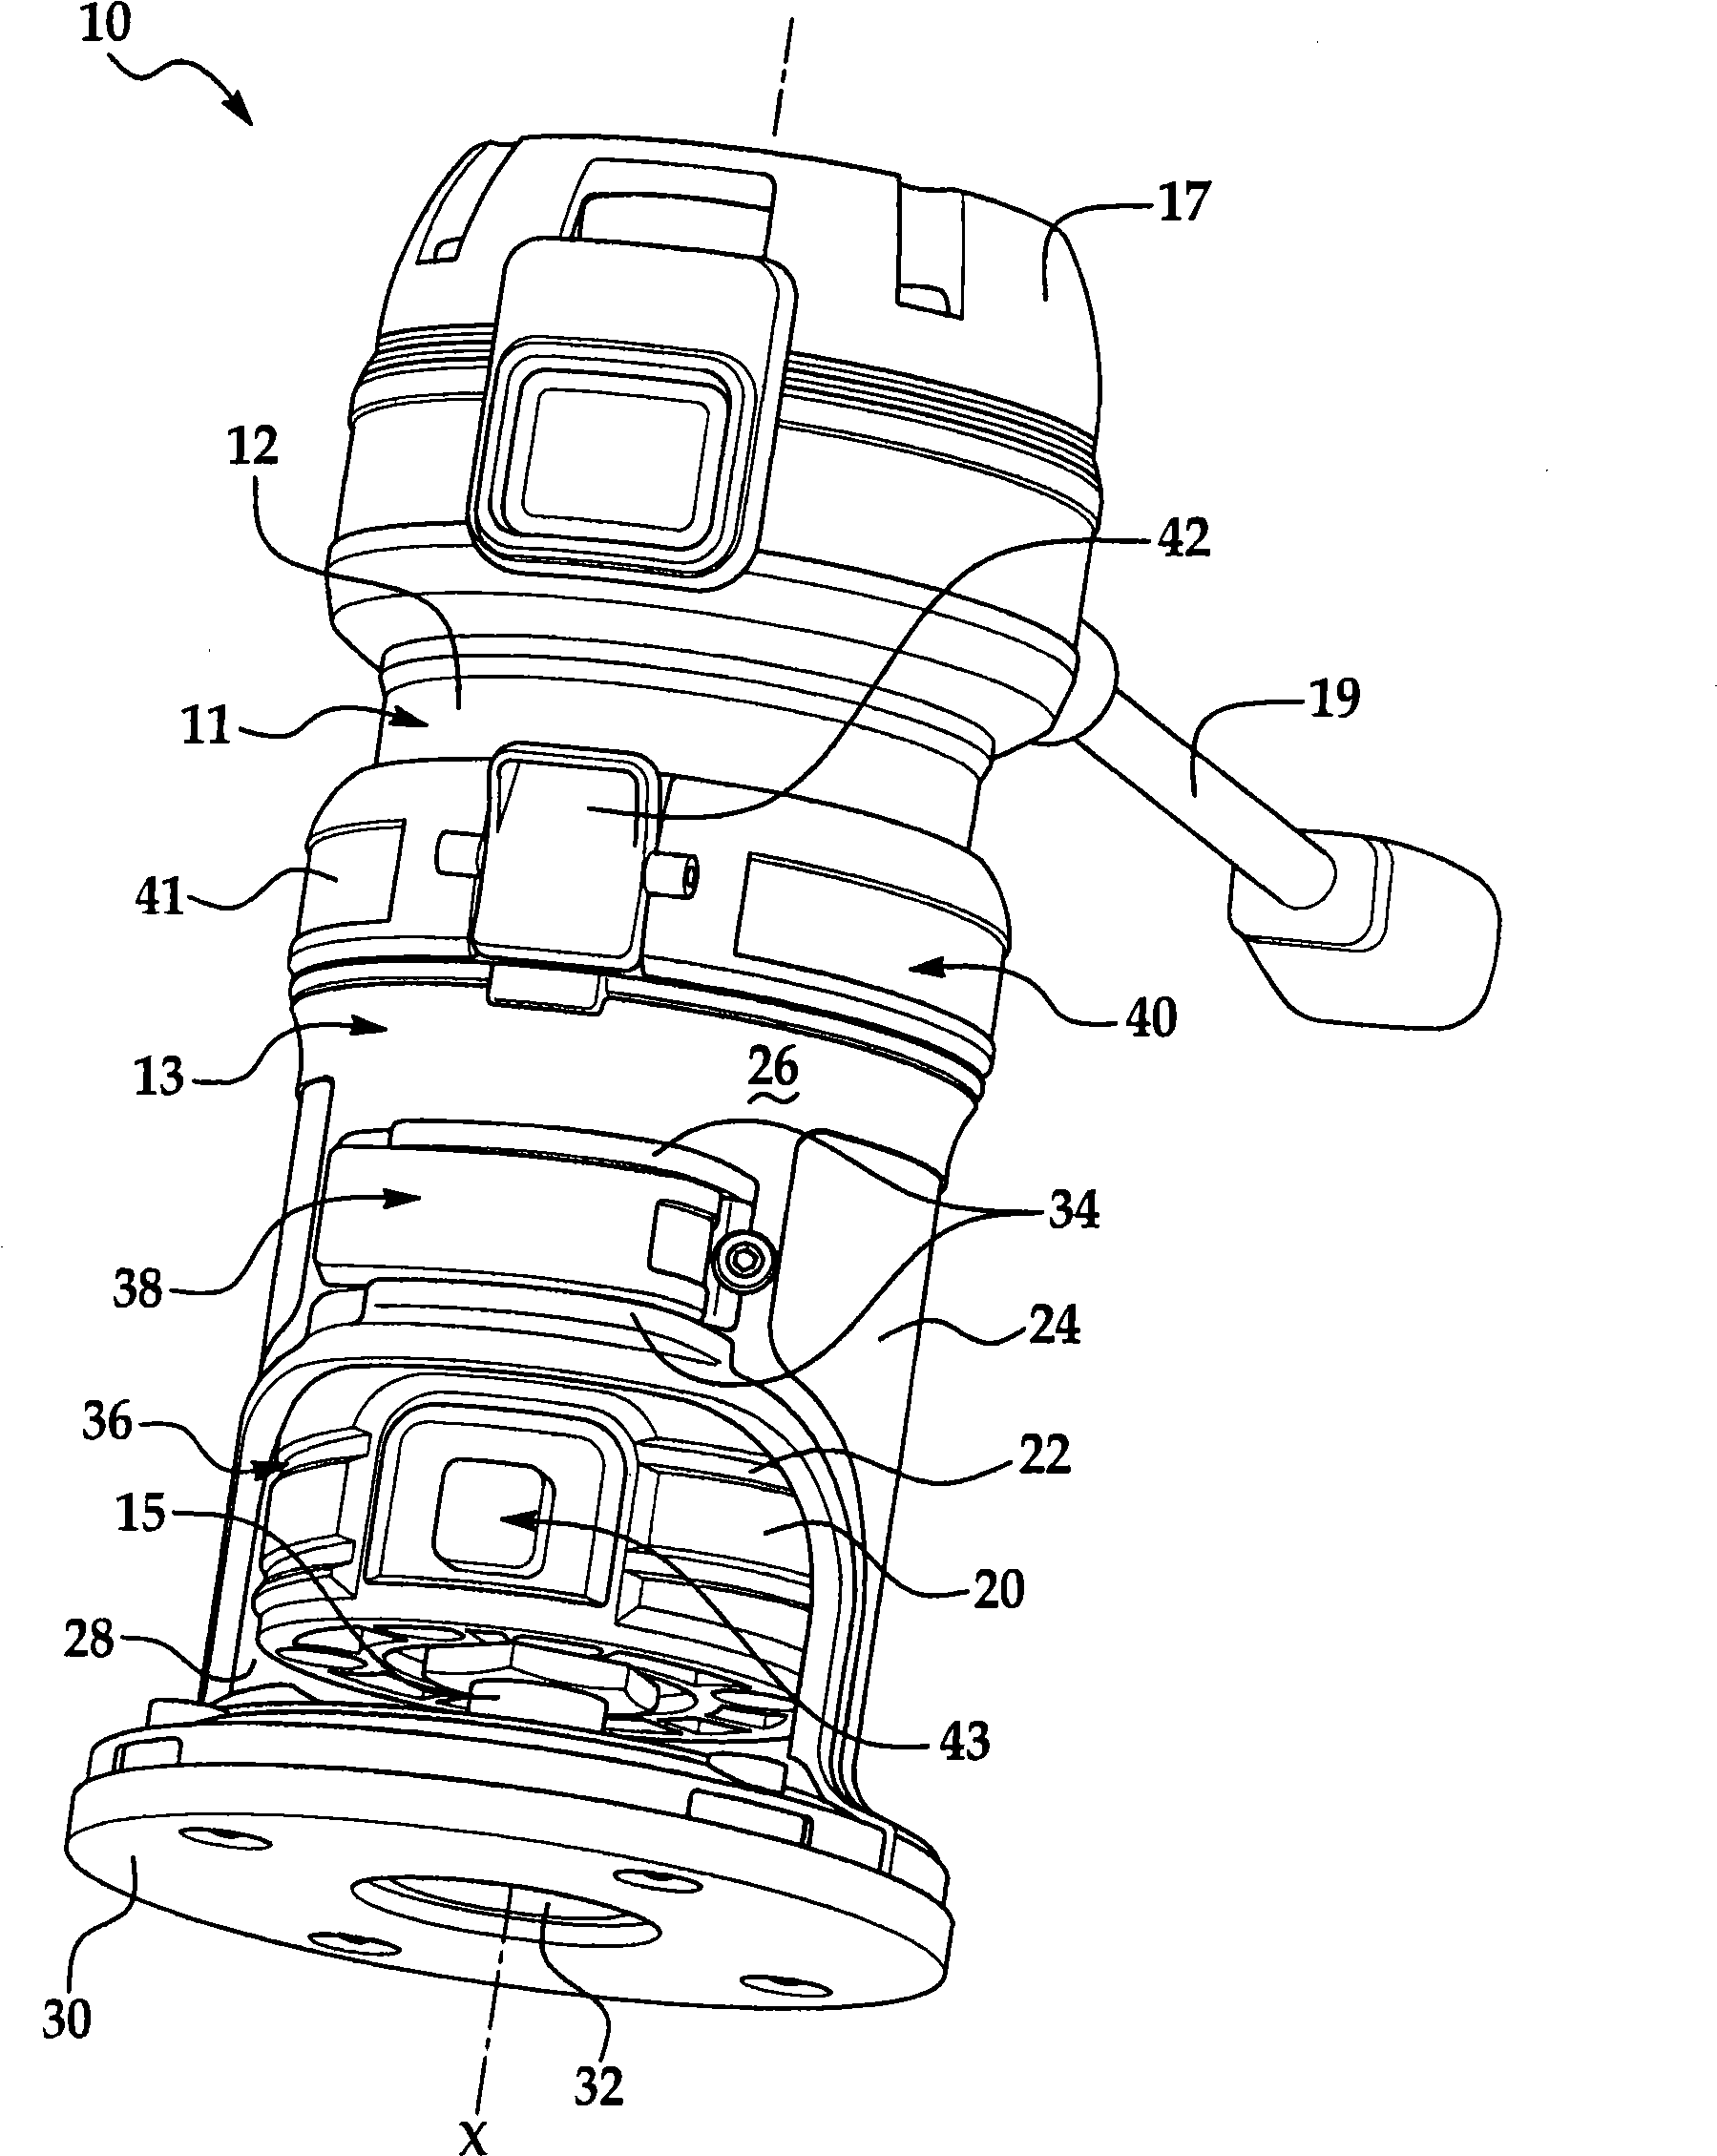 Power tool with spindle lock